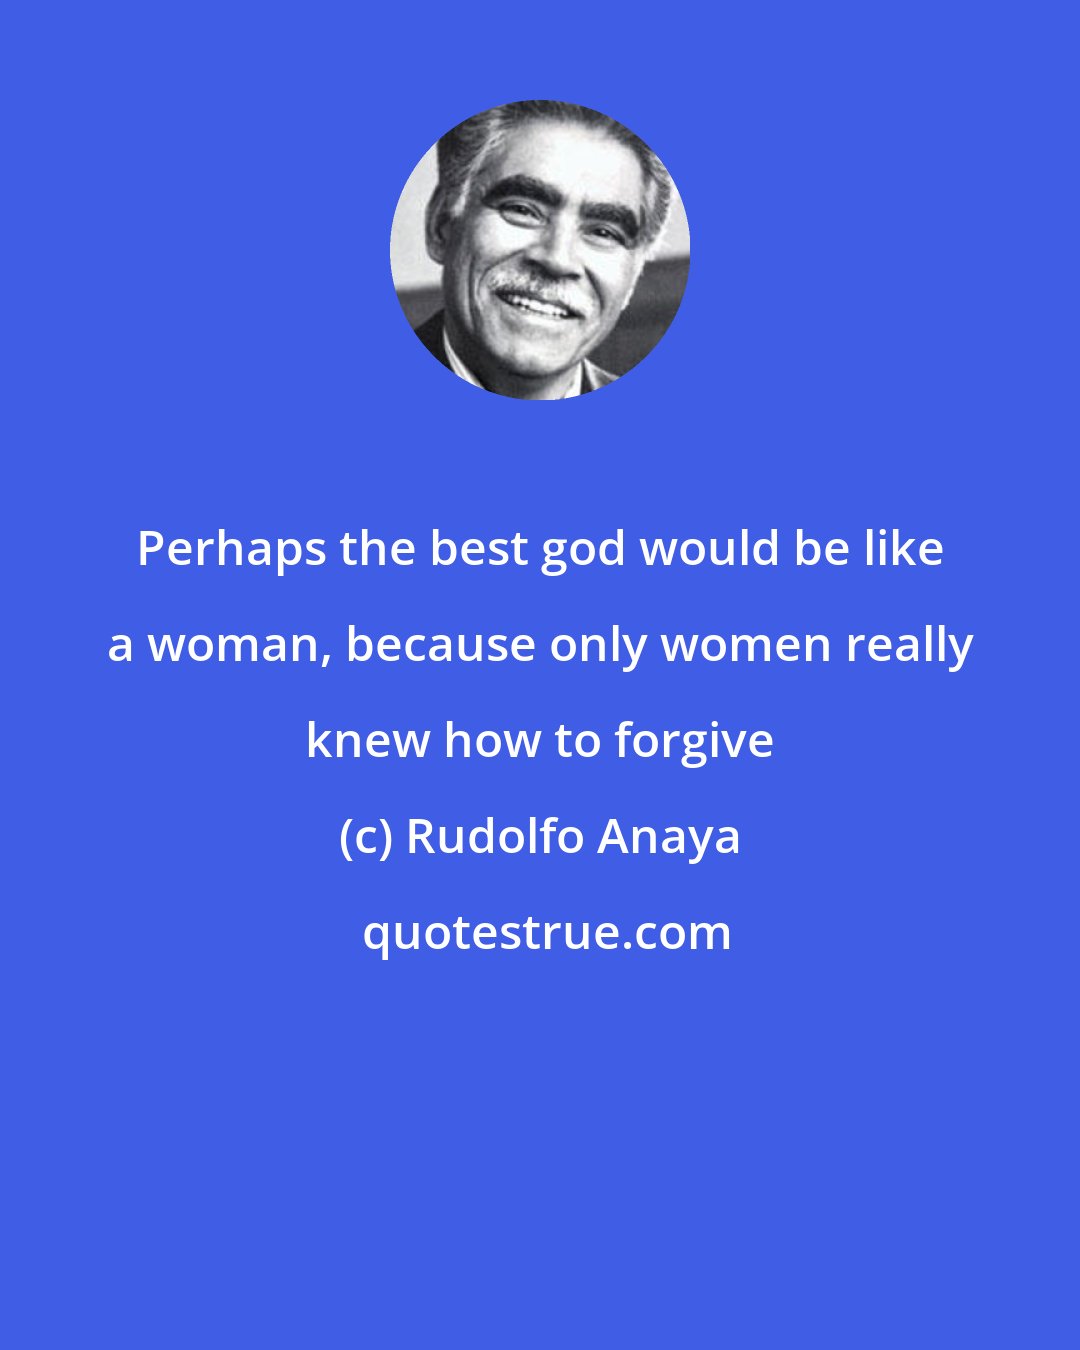 Rudolfo Anaya: Perhaps the best god would be like a woman, because only women really knew how to forgive